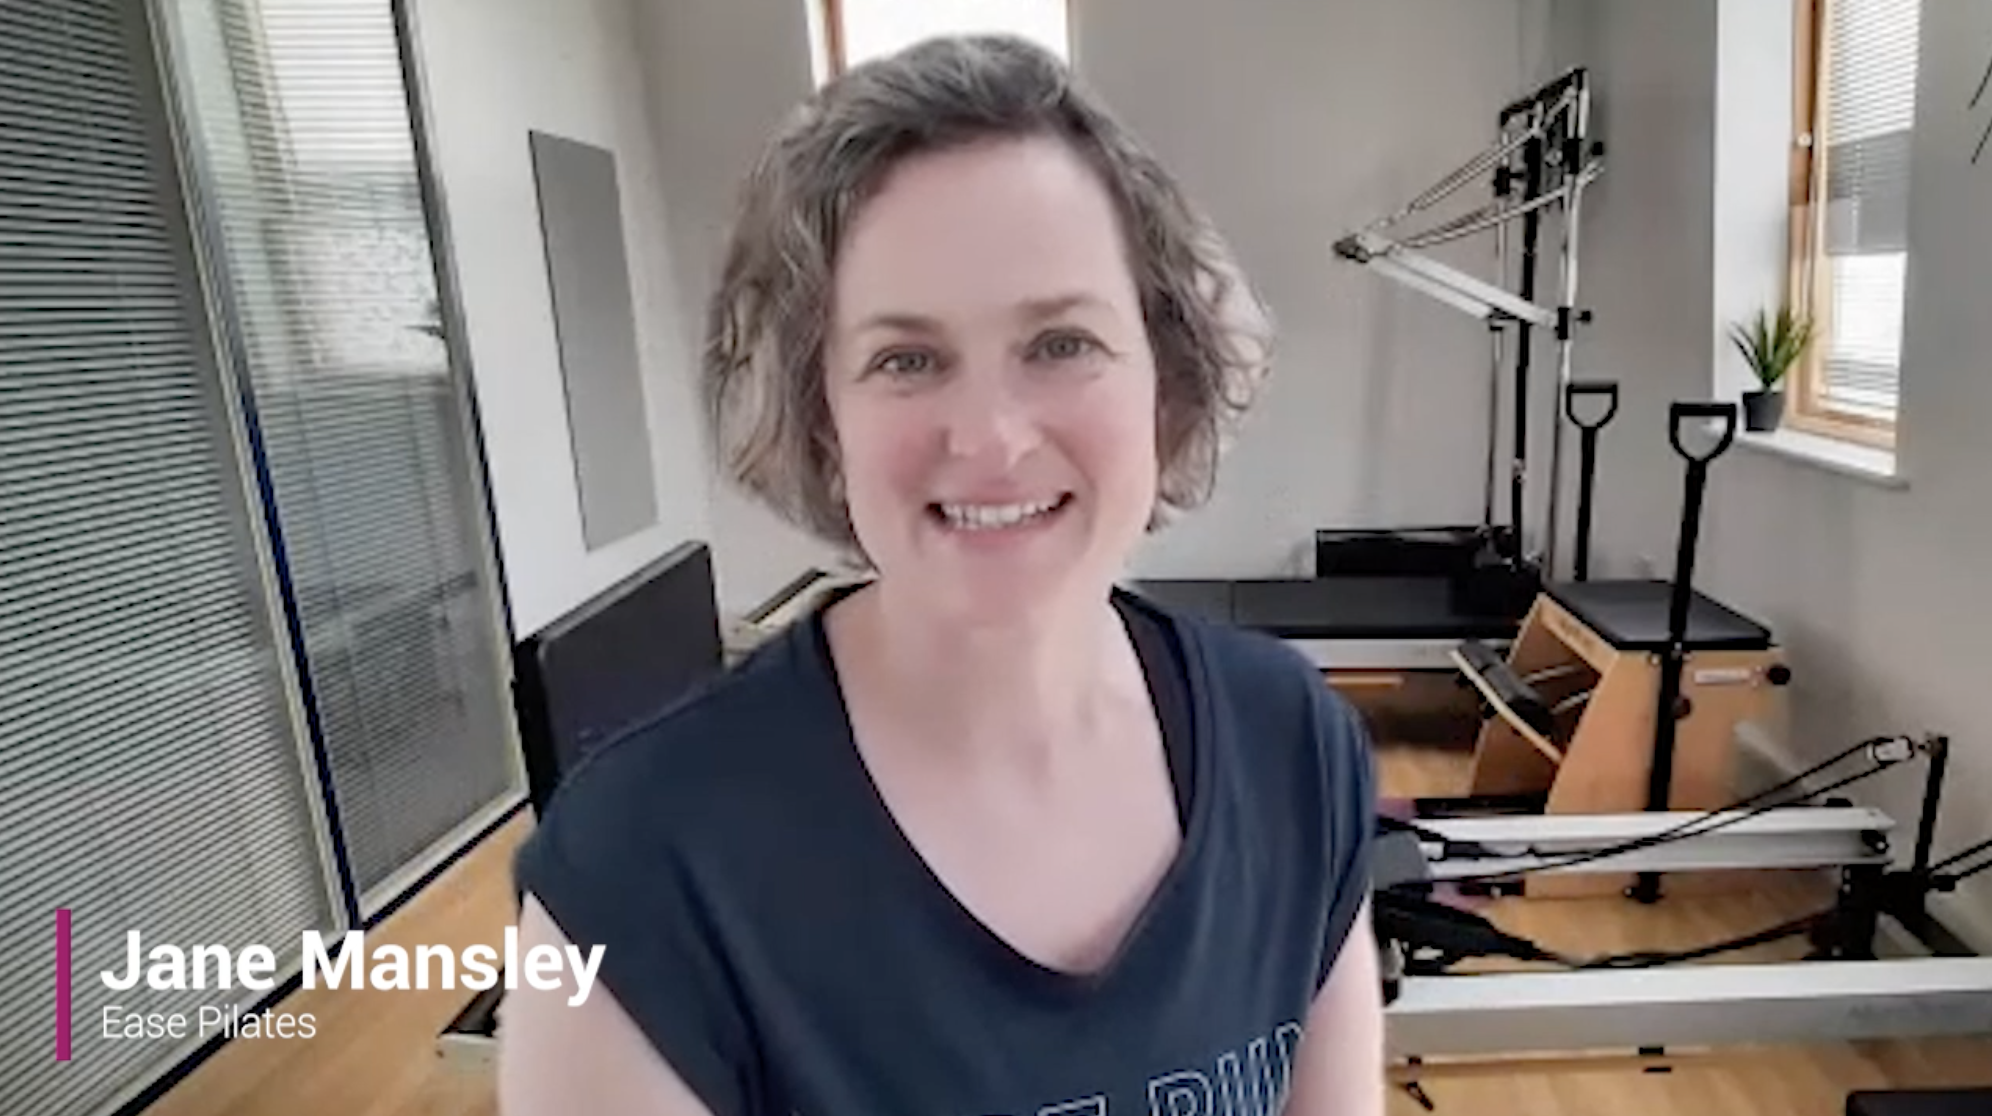 Jane Mansley shares how she uses TeamUp to manage her studio